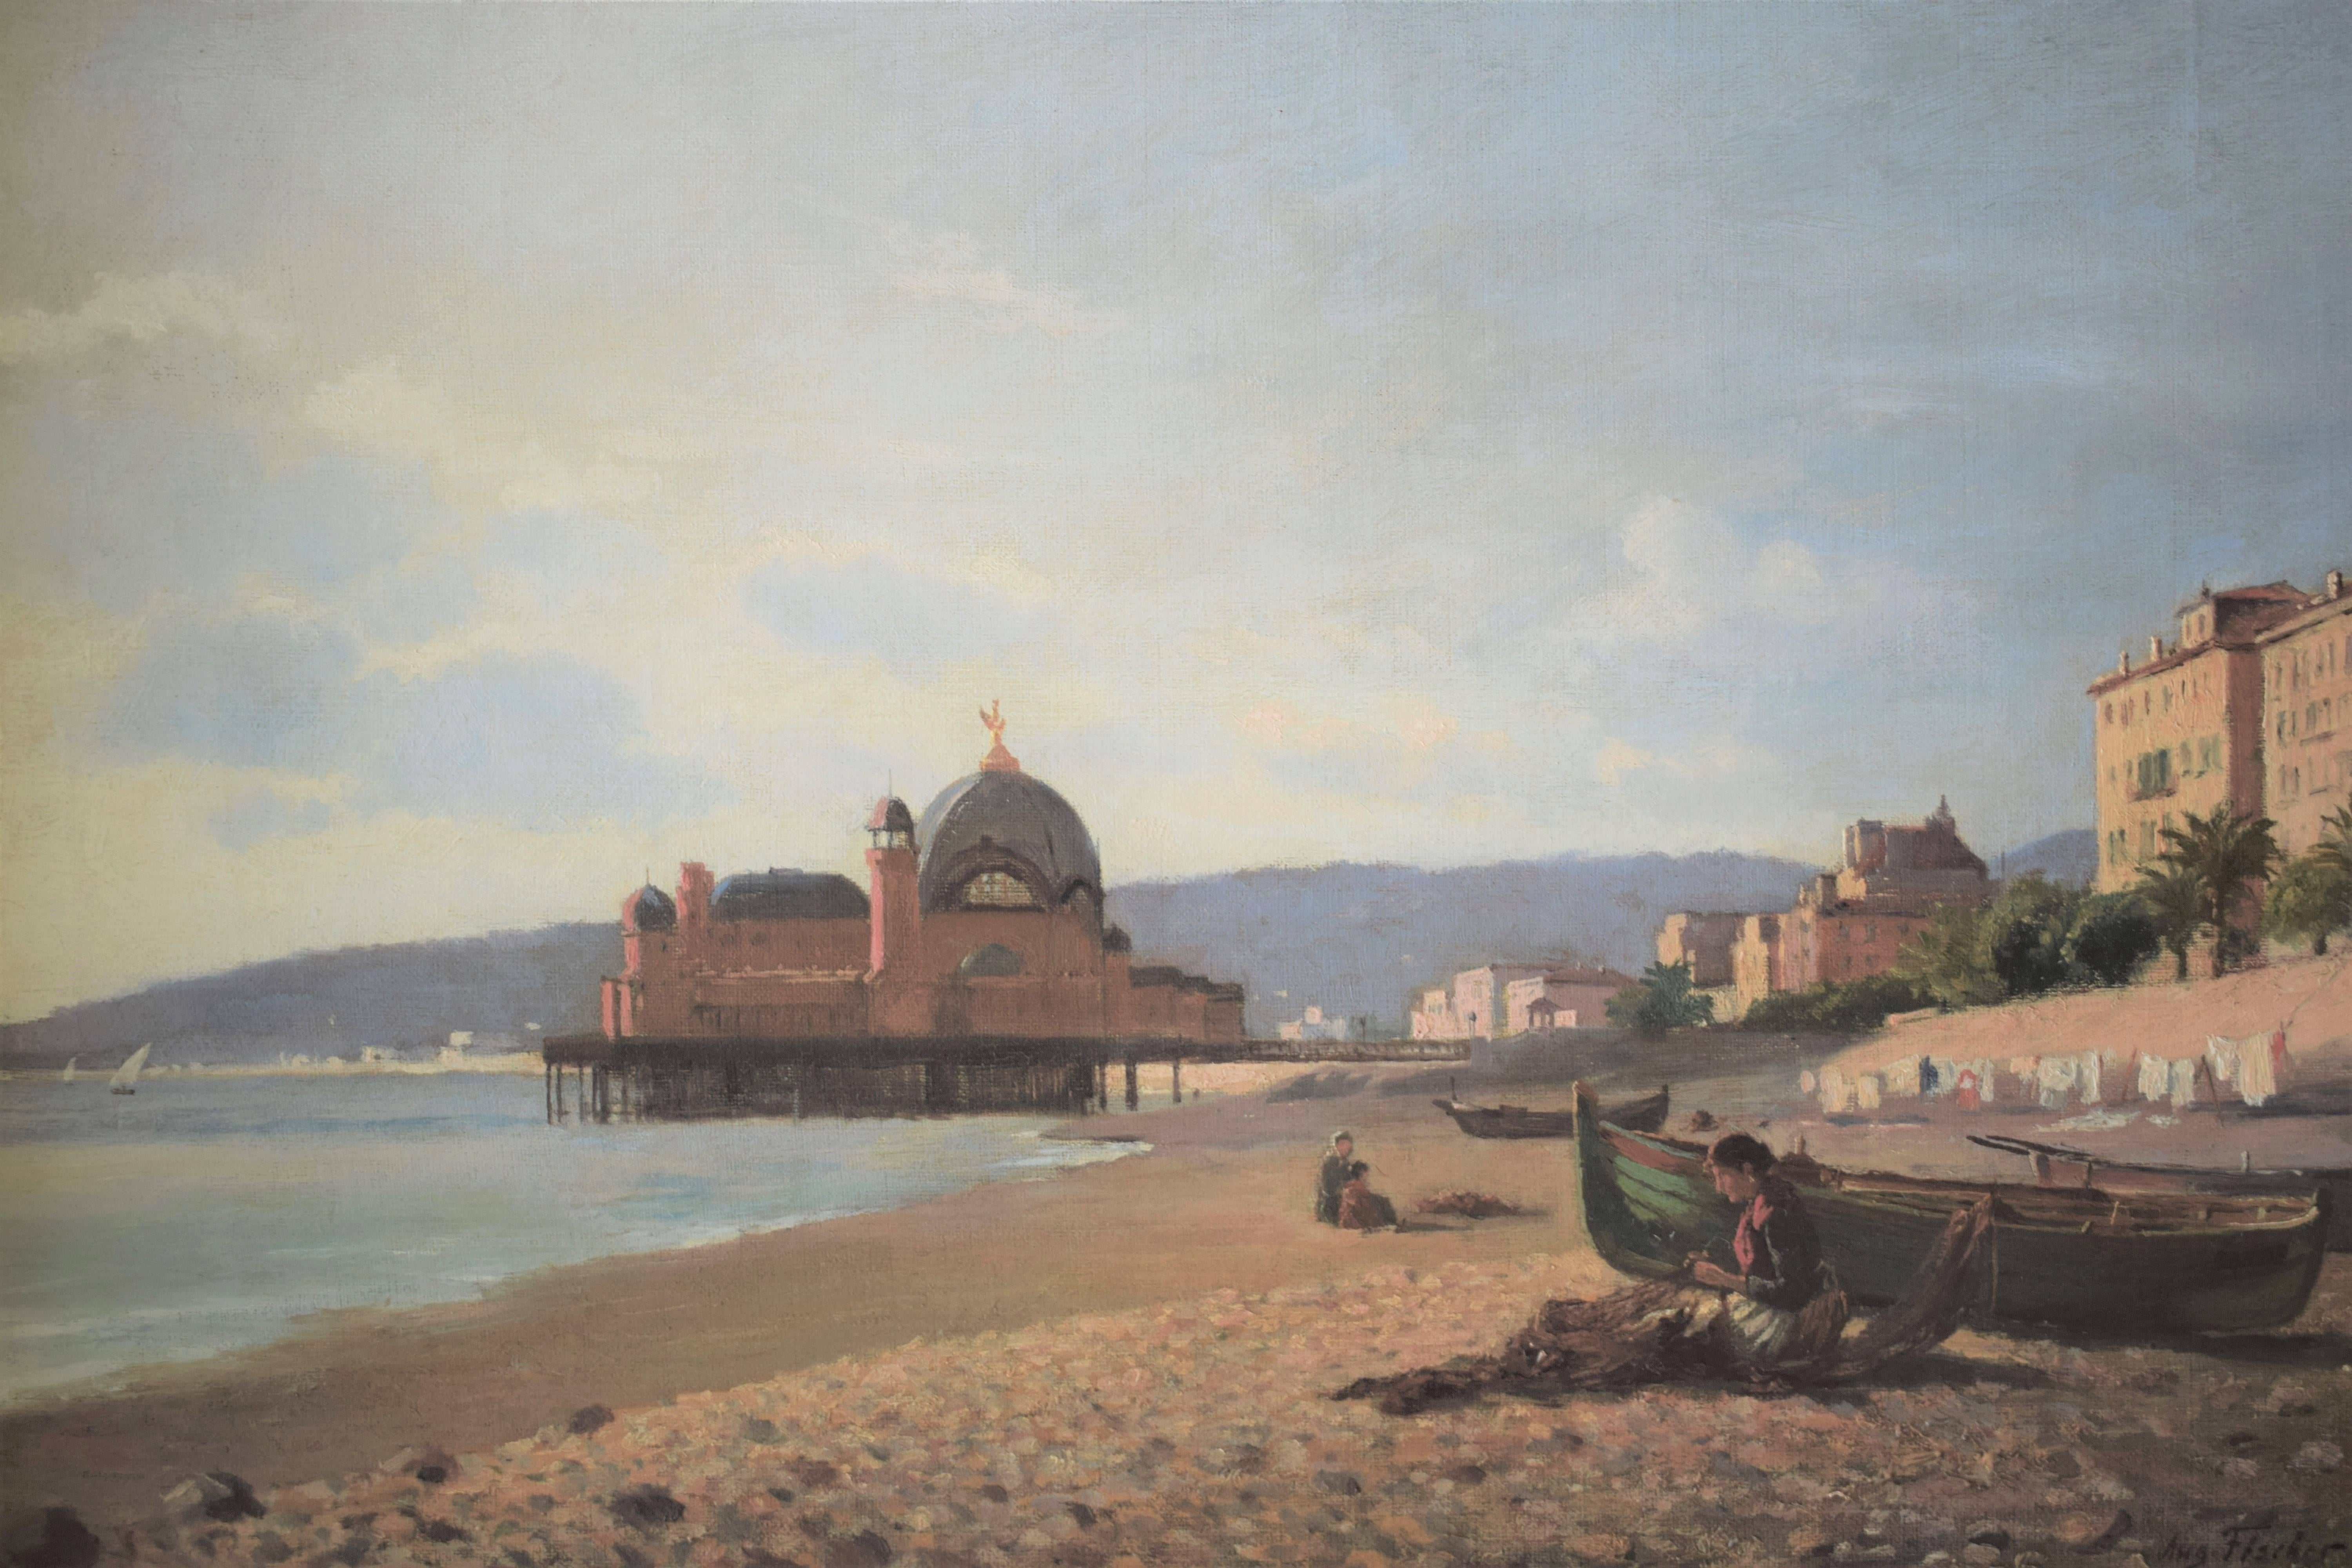 Oil painting with boats on the beach and women mending nets, in back ground the Crystal Casino in Nice by the Danish painter August Fischer (1854-1921).
Signed Aug. Fischer 94.
  